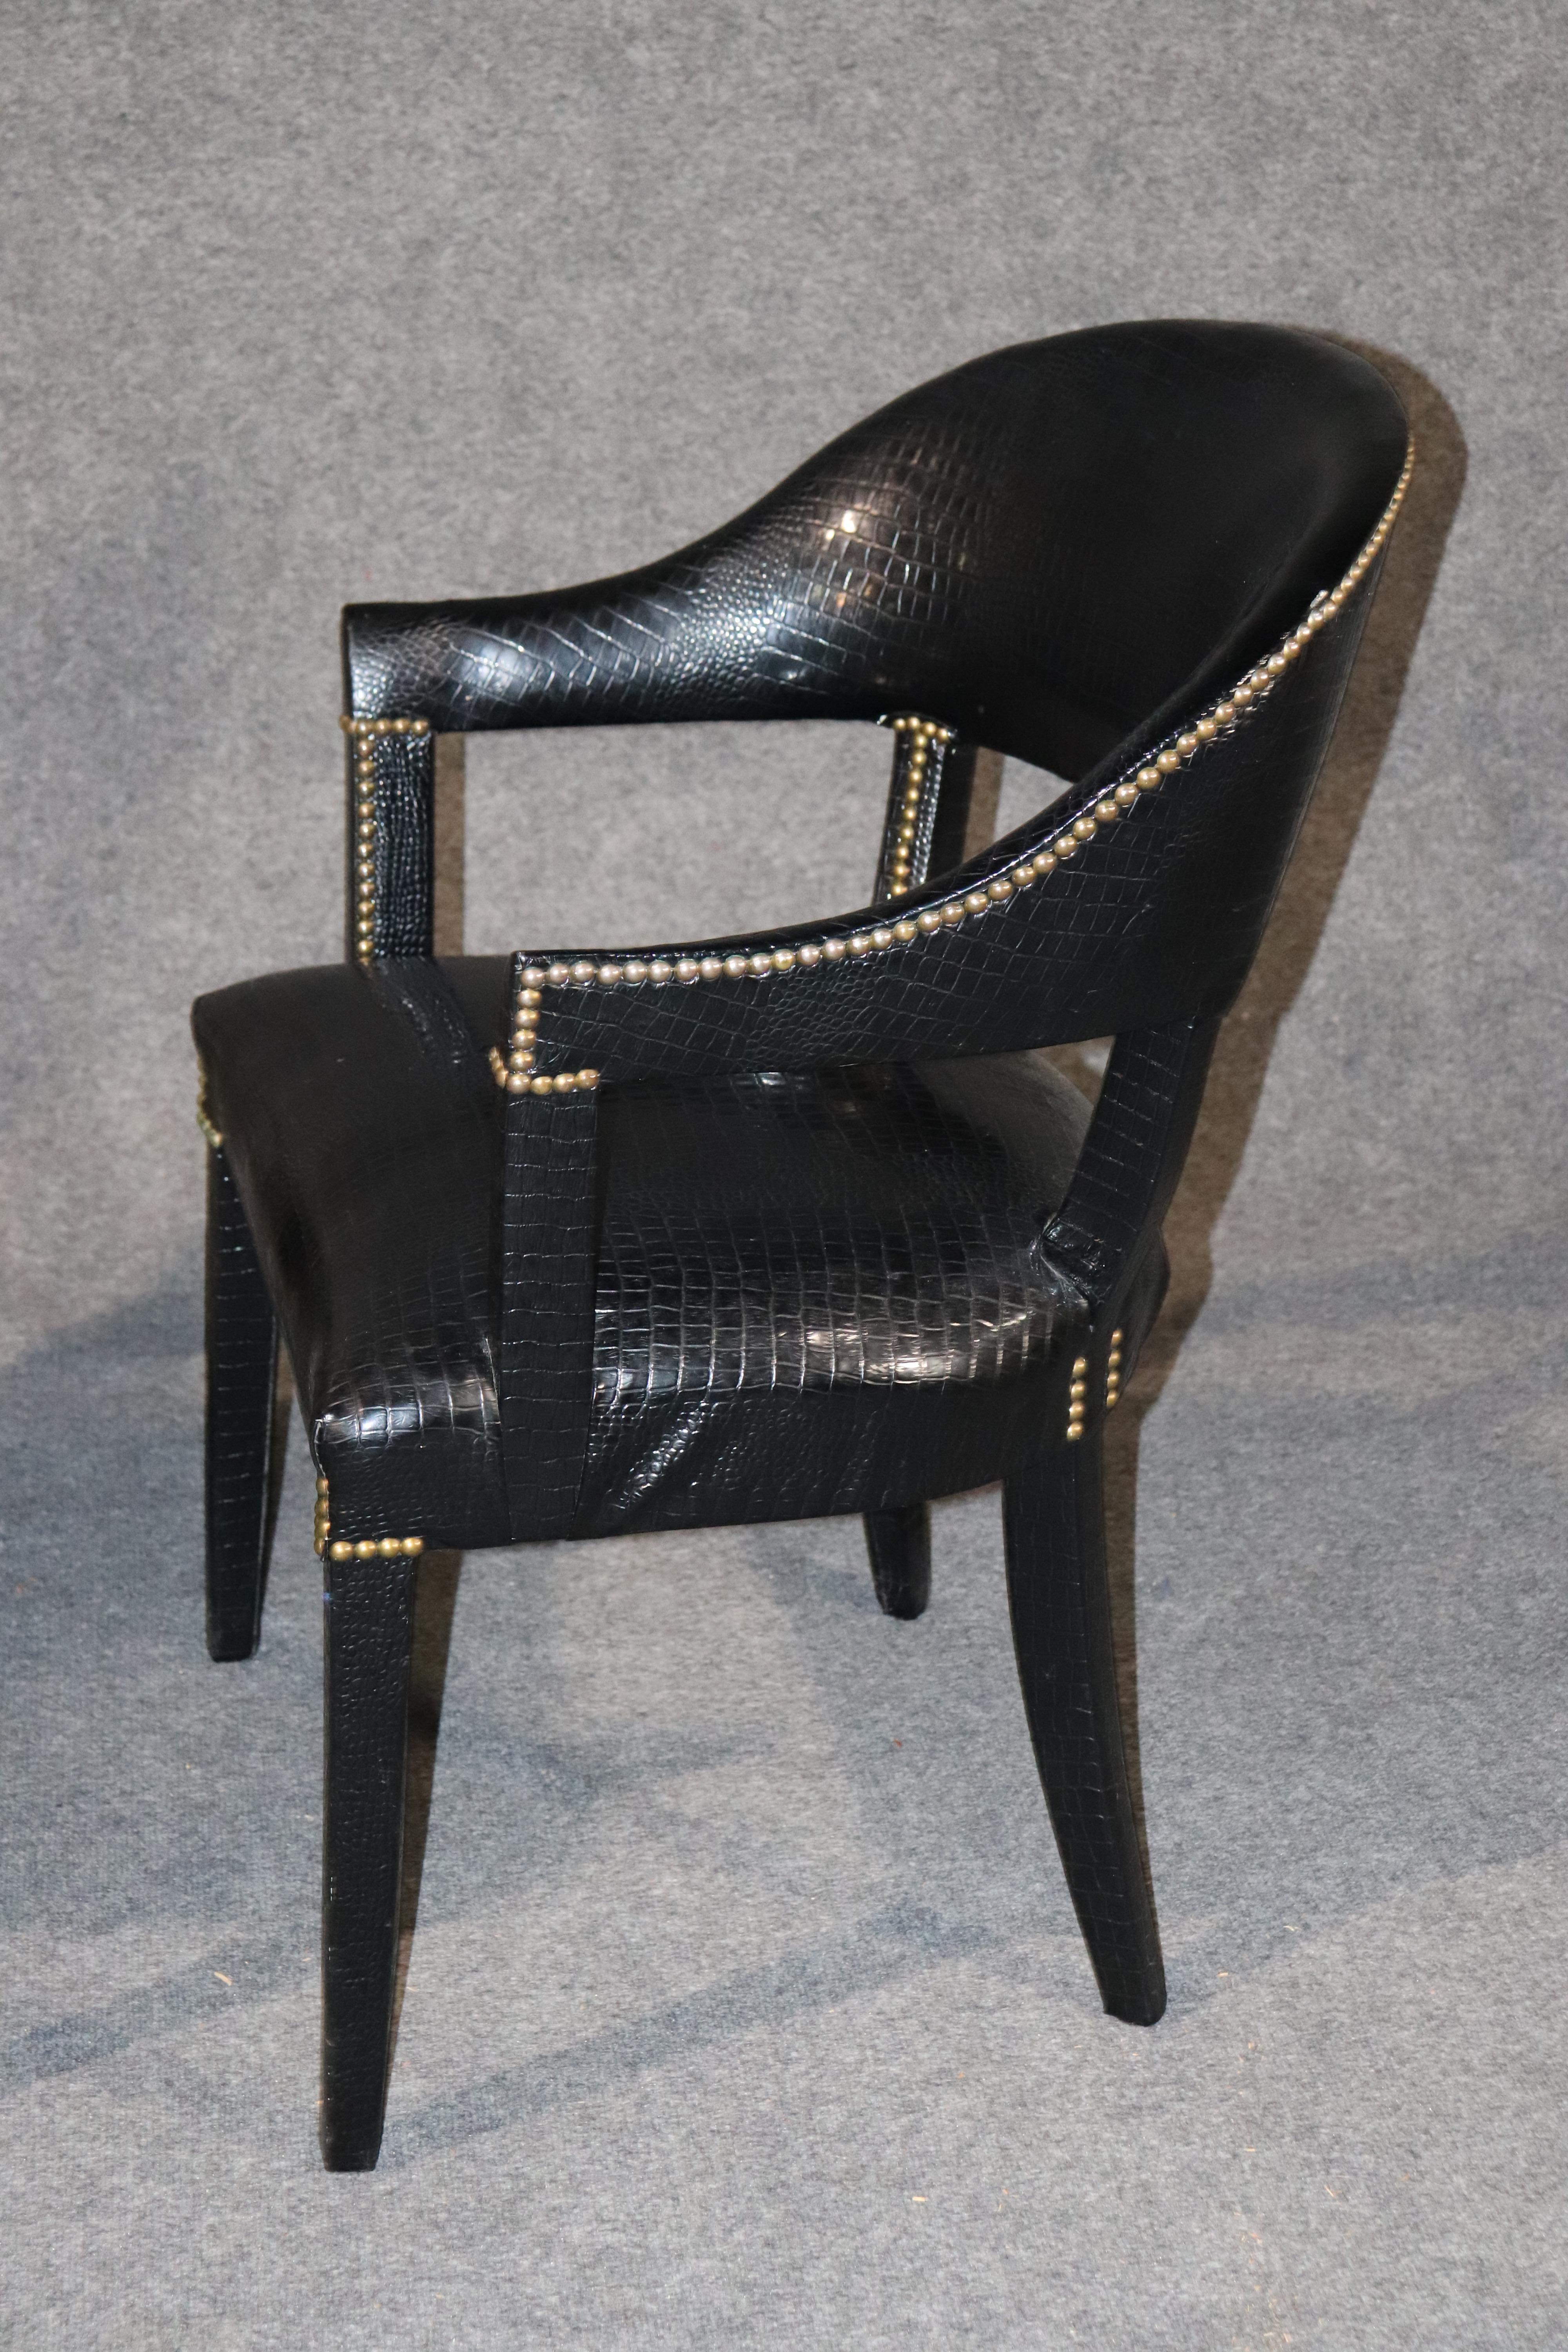 Mahogany Pair Black Alligator Printed Faux Leather Brass Studded Occasional Office Chairs